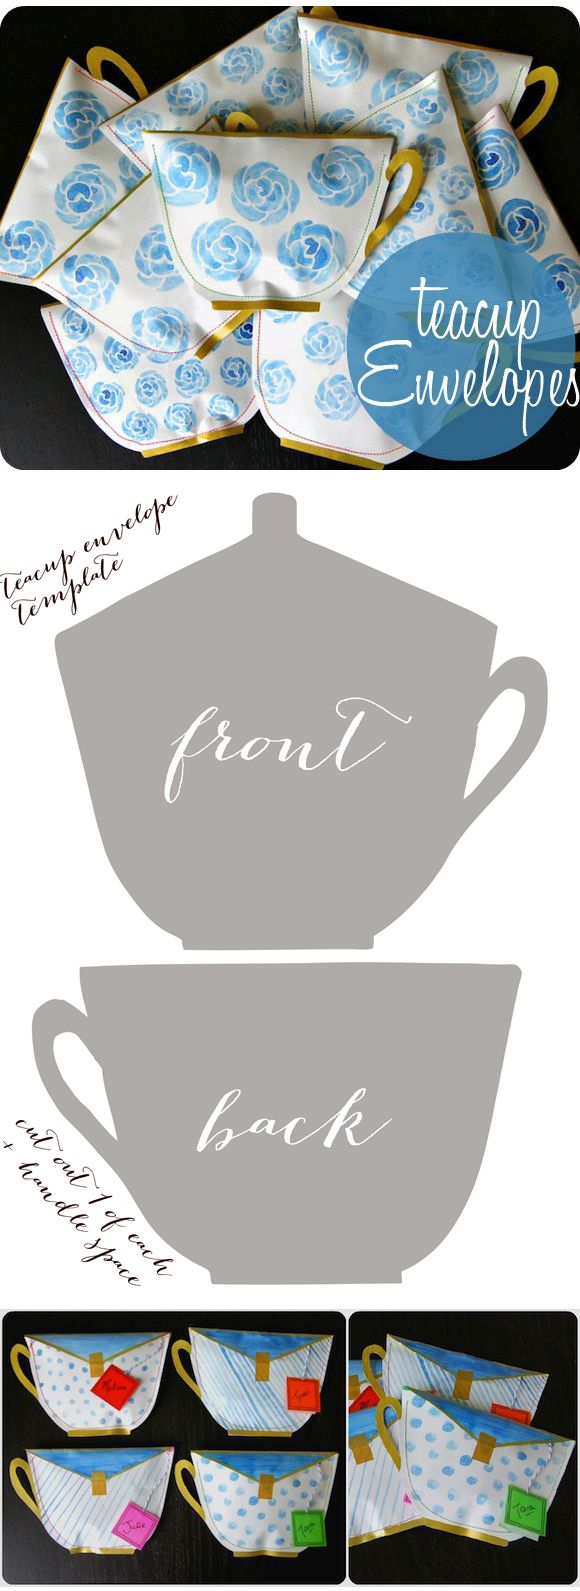 A Teacup Envelope Design With Free Template -- from Marisa Edghill on Oh My Hand...